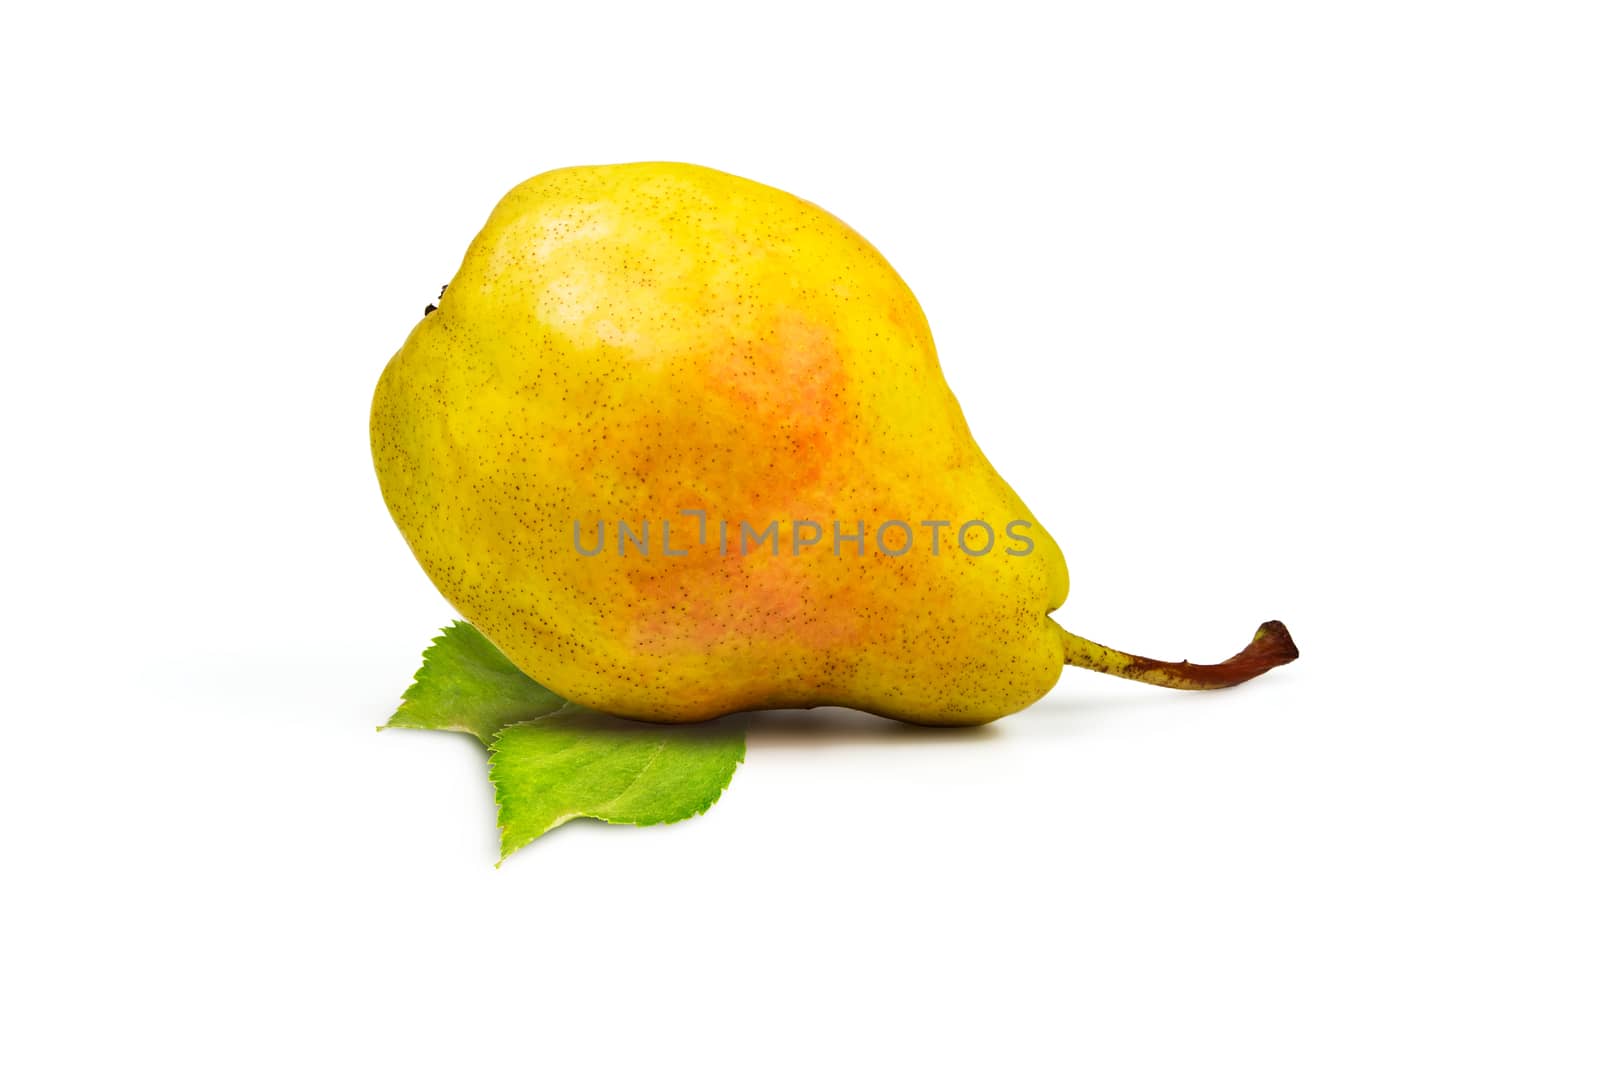 Yellow ripe pear and green leaves on a white background